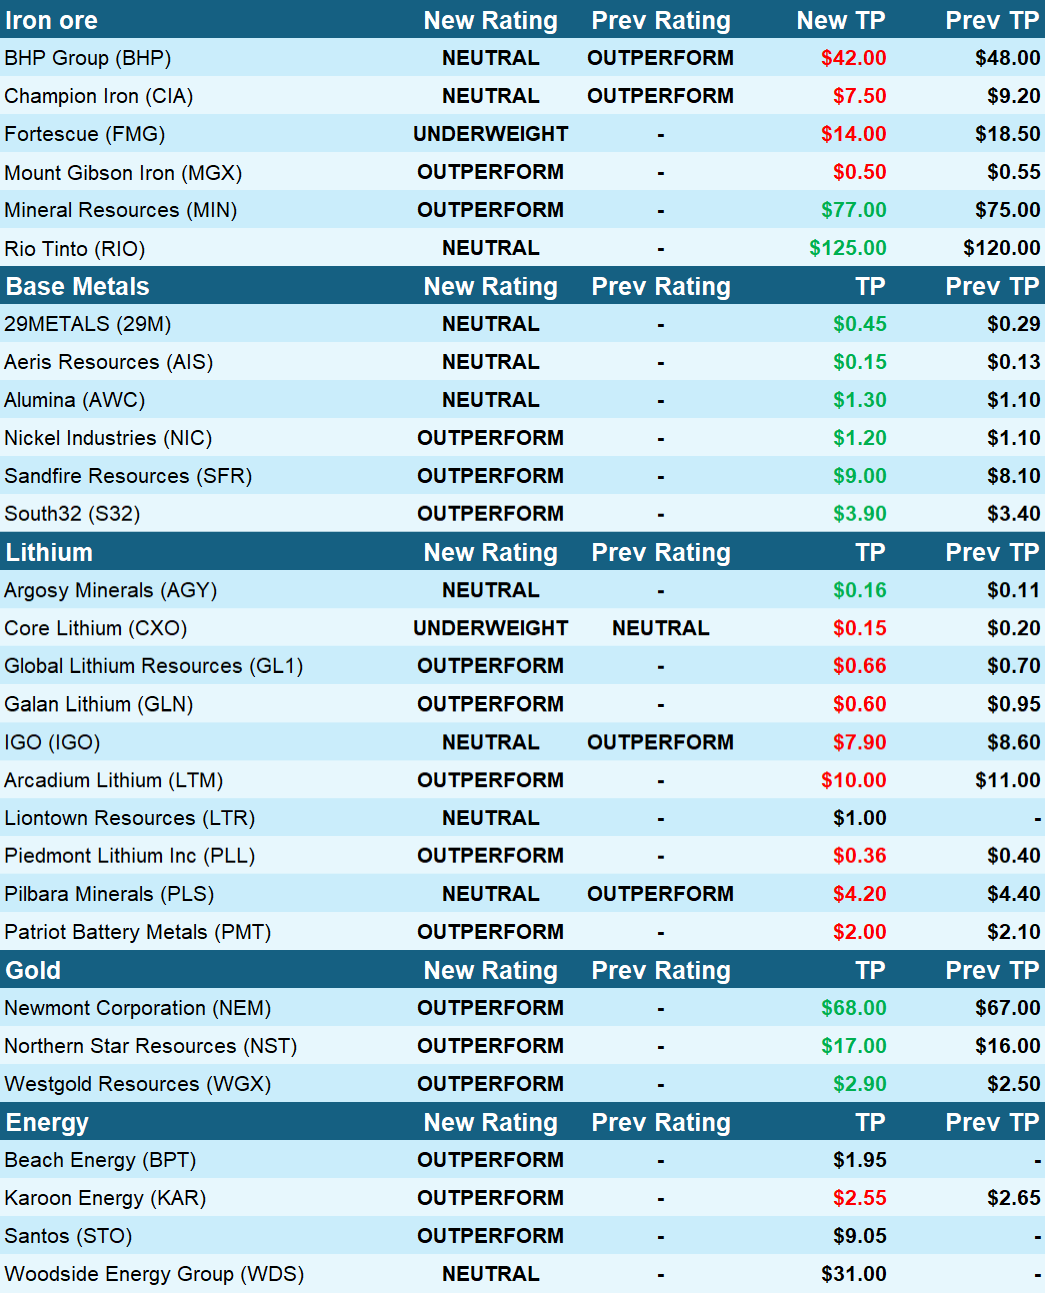 Macquarie's latest metals and energy ratings and price targets. Source: Macquarie Research, March 15 2024